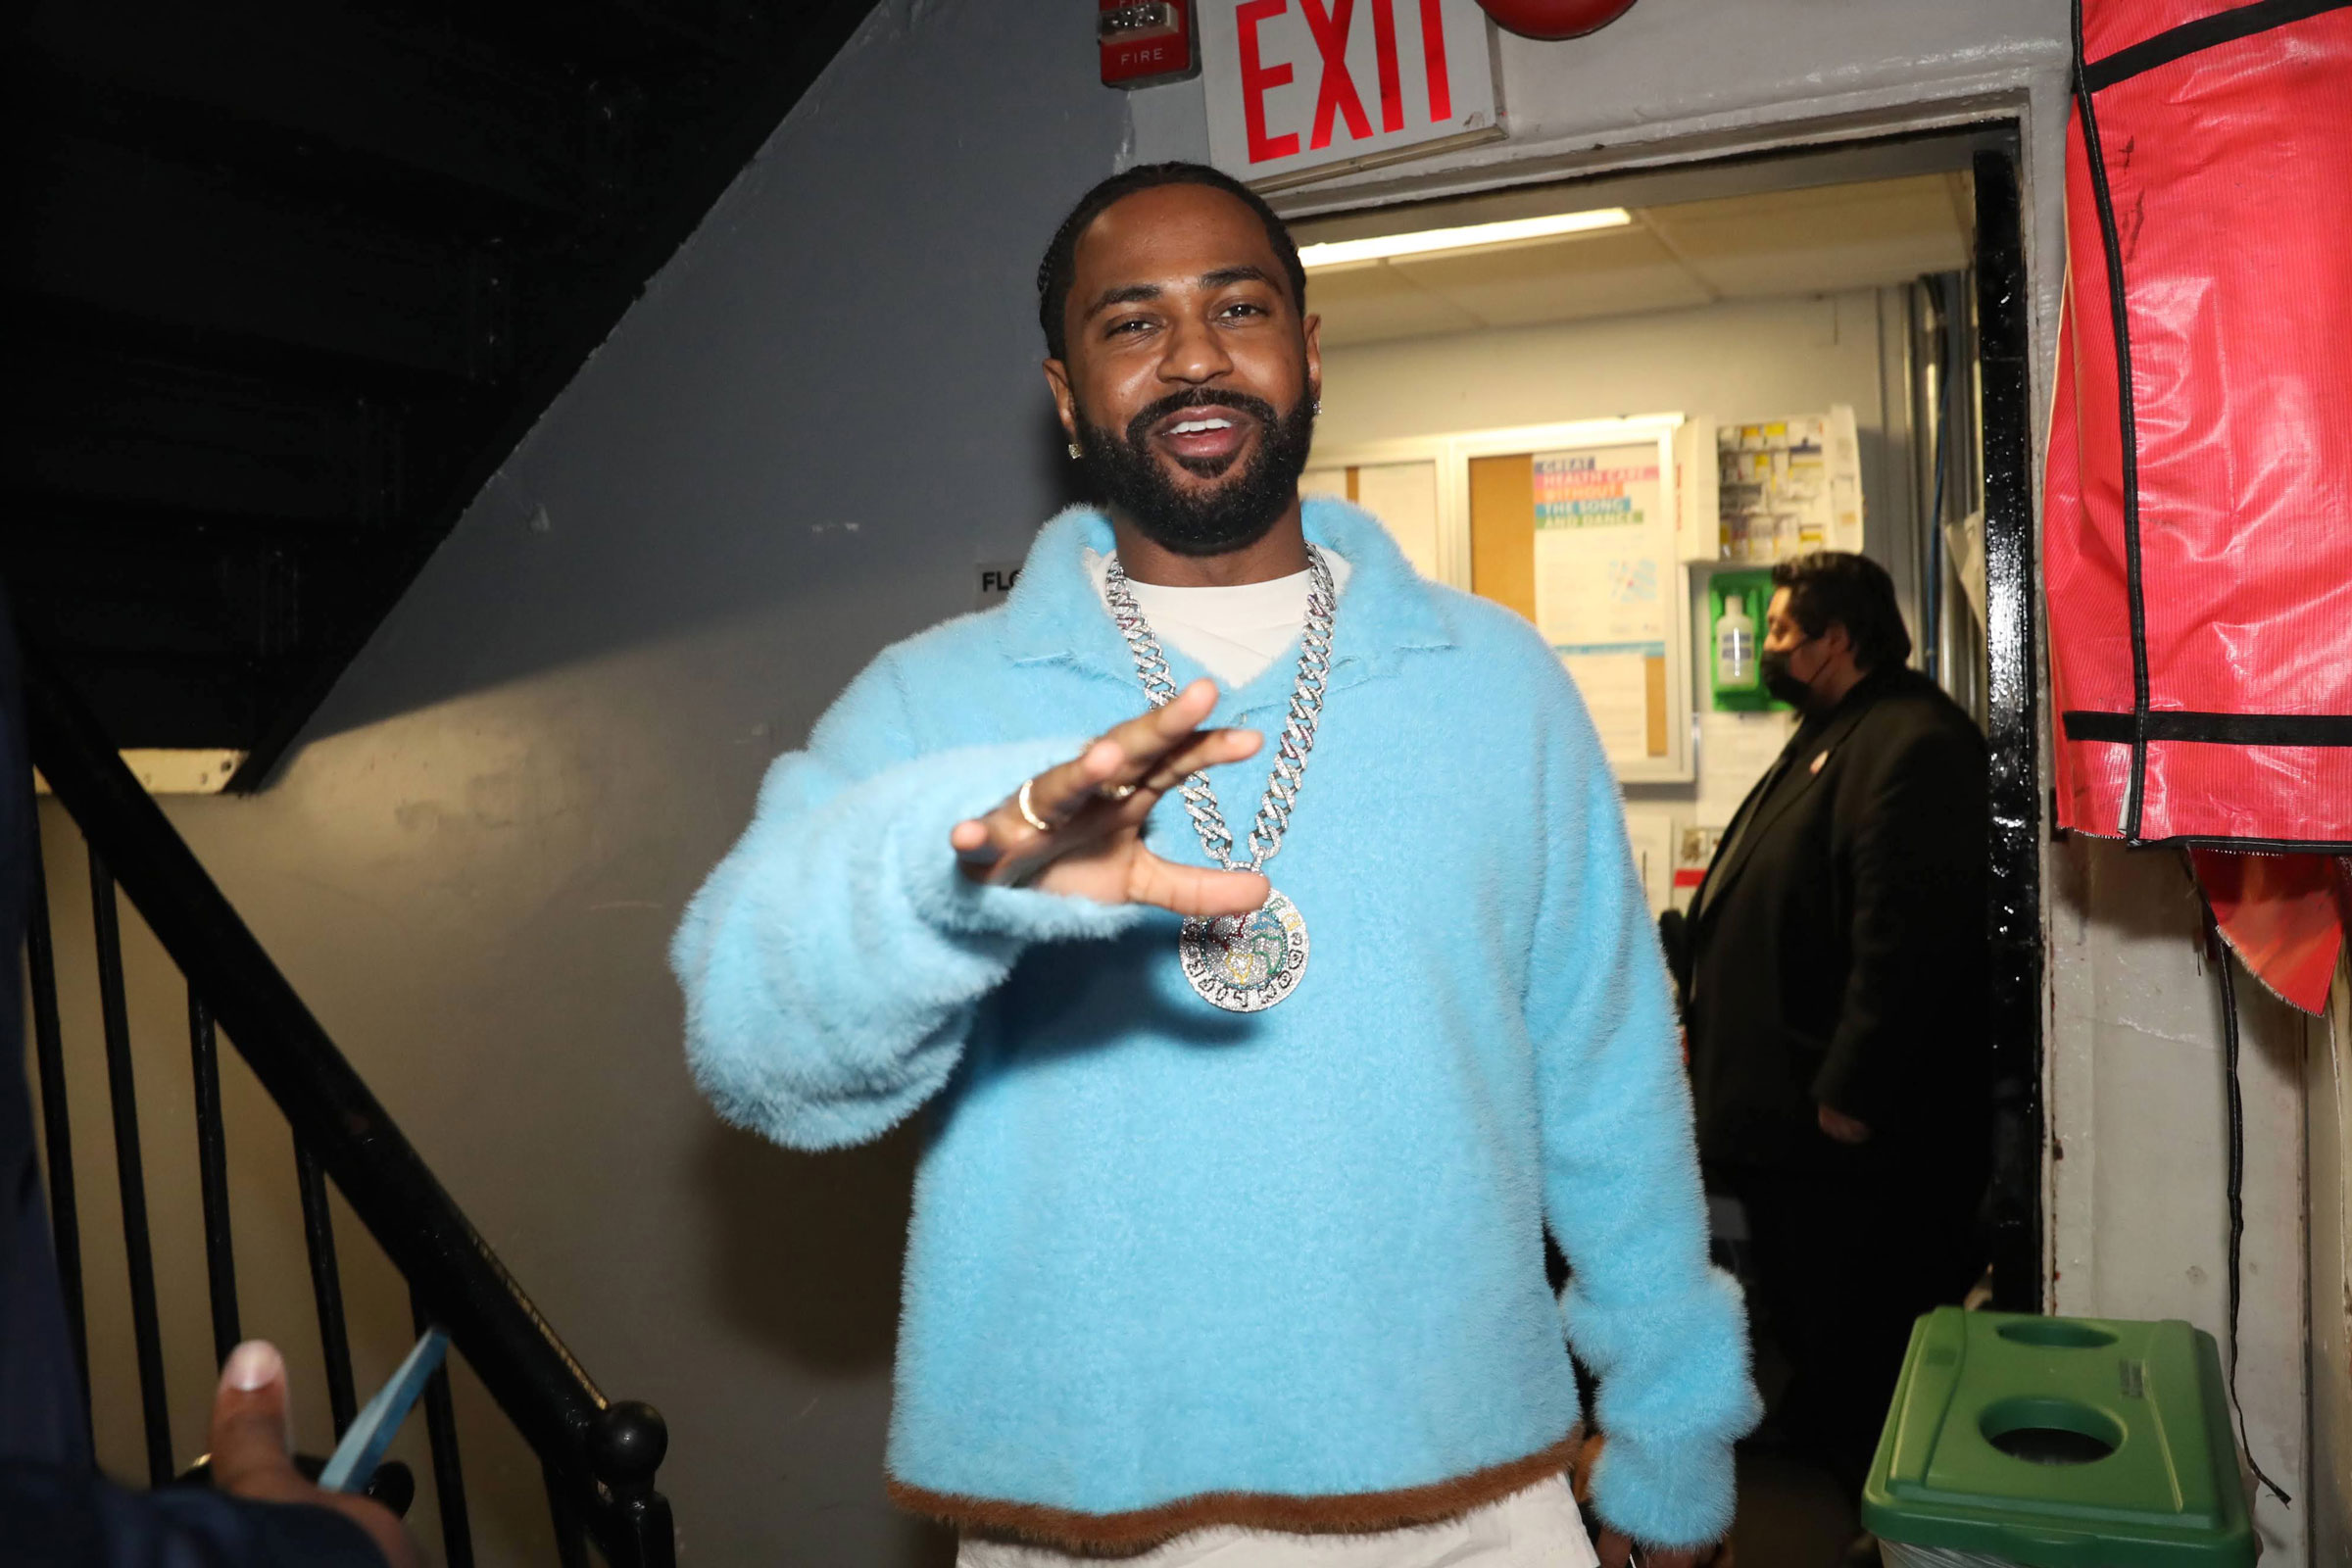 Big Sean attends Black Entrepreneurs Day hosted by Daymond John at The Apollo Theater in New York City on Oct. 22, 2022. (Johnny Nunez—WireImage/Getty Images)